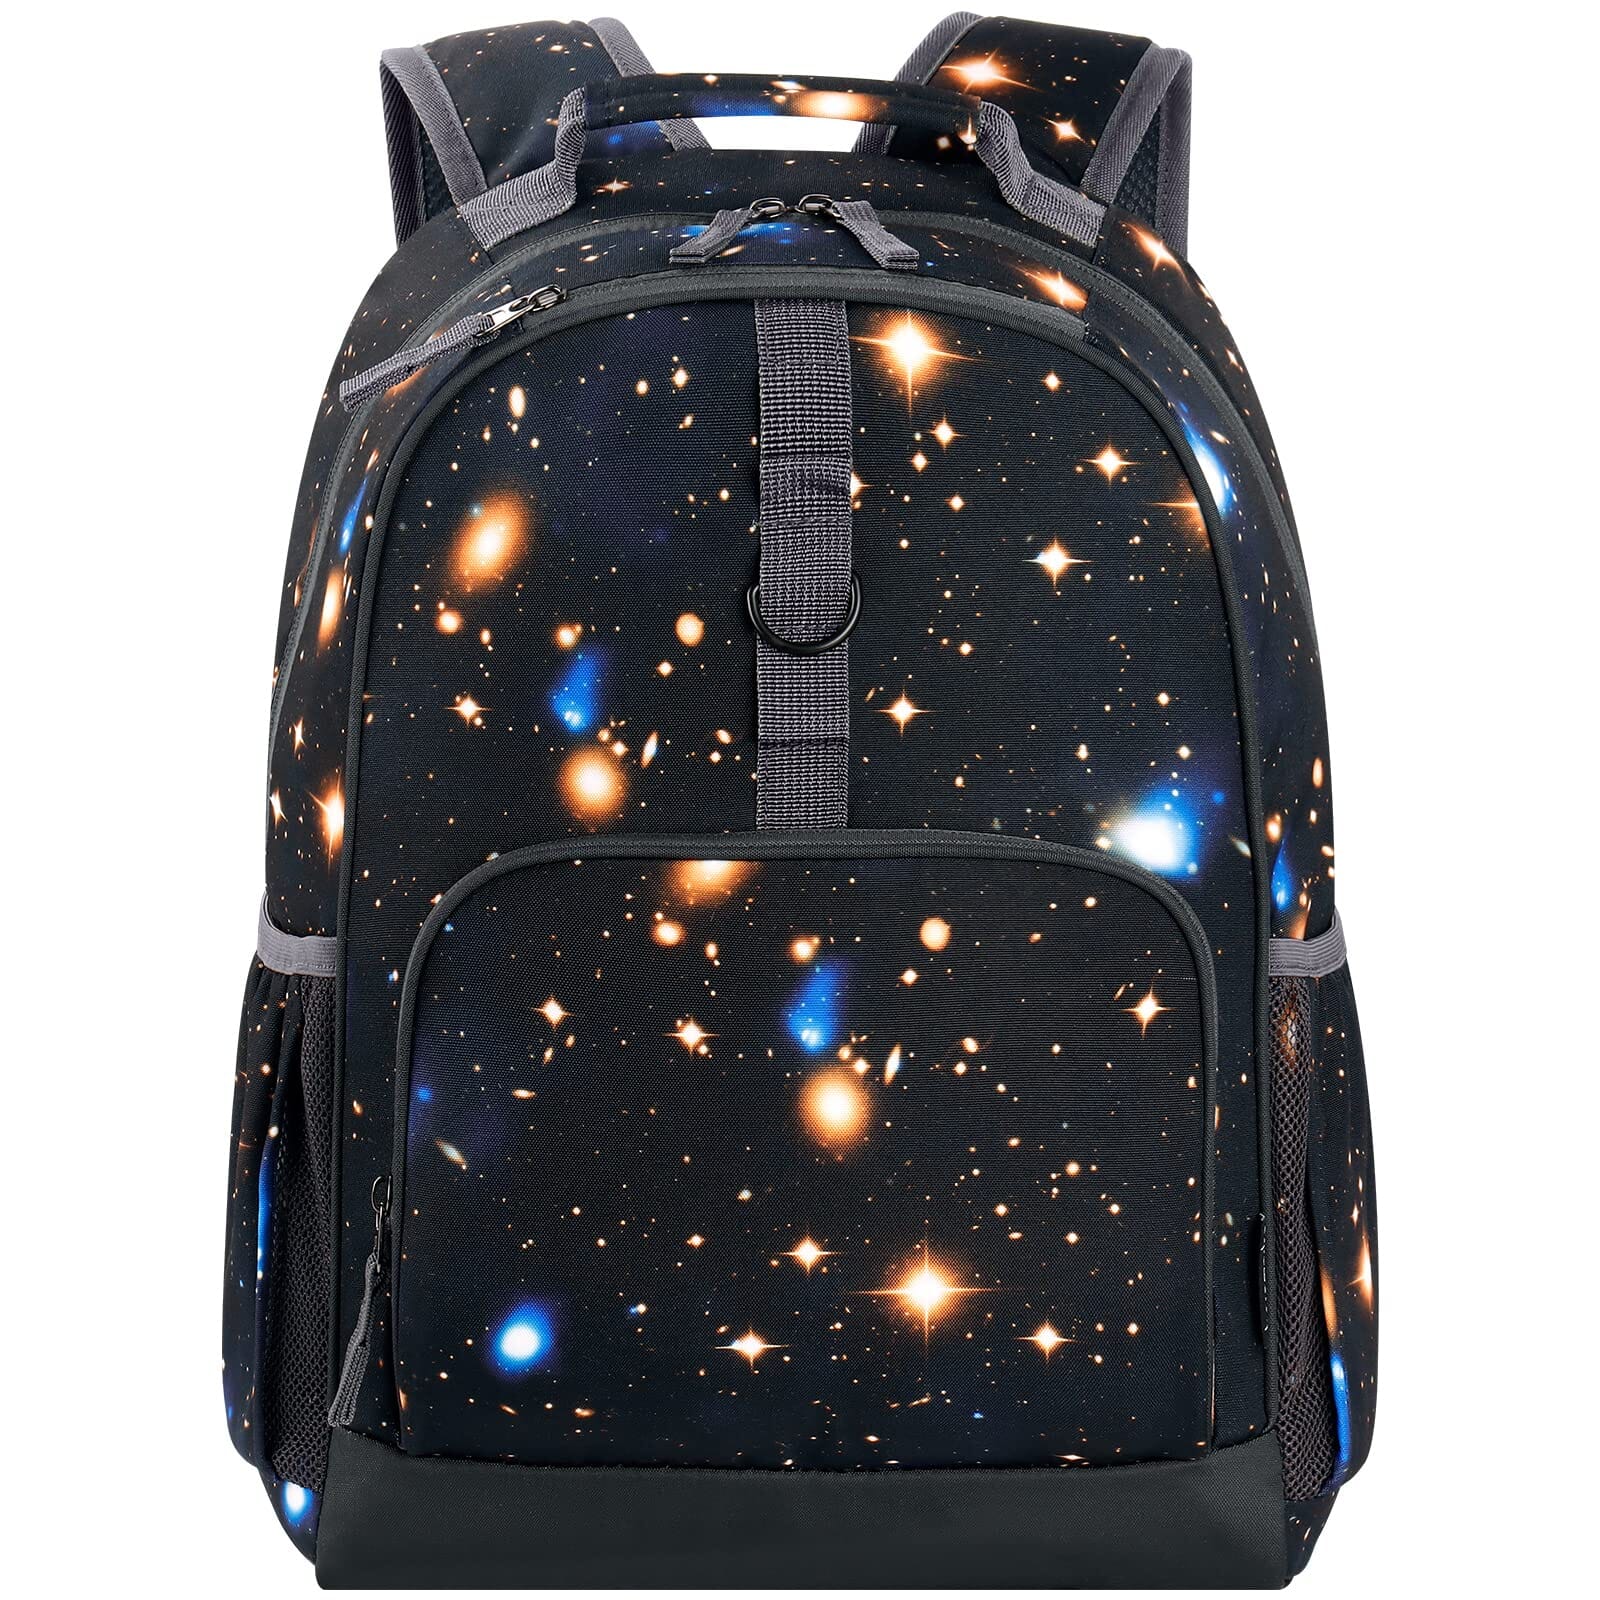 Choco Mocha Galaxy Backpack for Boys Backpacks for Elementary School Backpack for Kids Backpack Boys 17 inch Backpack for Boys Galaxy Bookbag with Chest Strap 5-7 6-8 School Bag 2nd 3rd Grade Black chocomochakids 